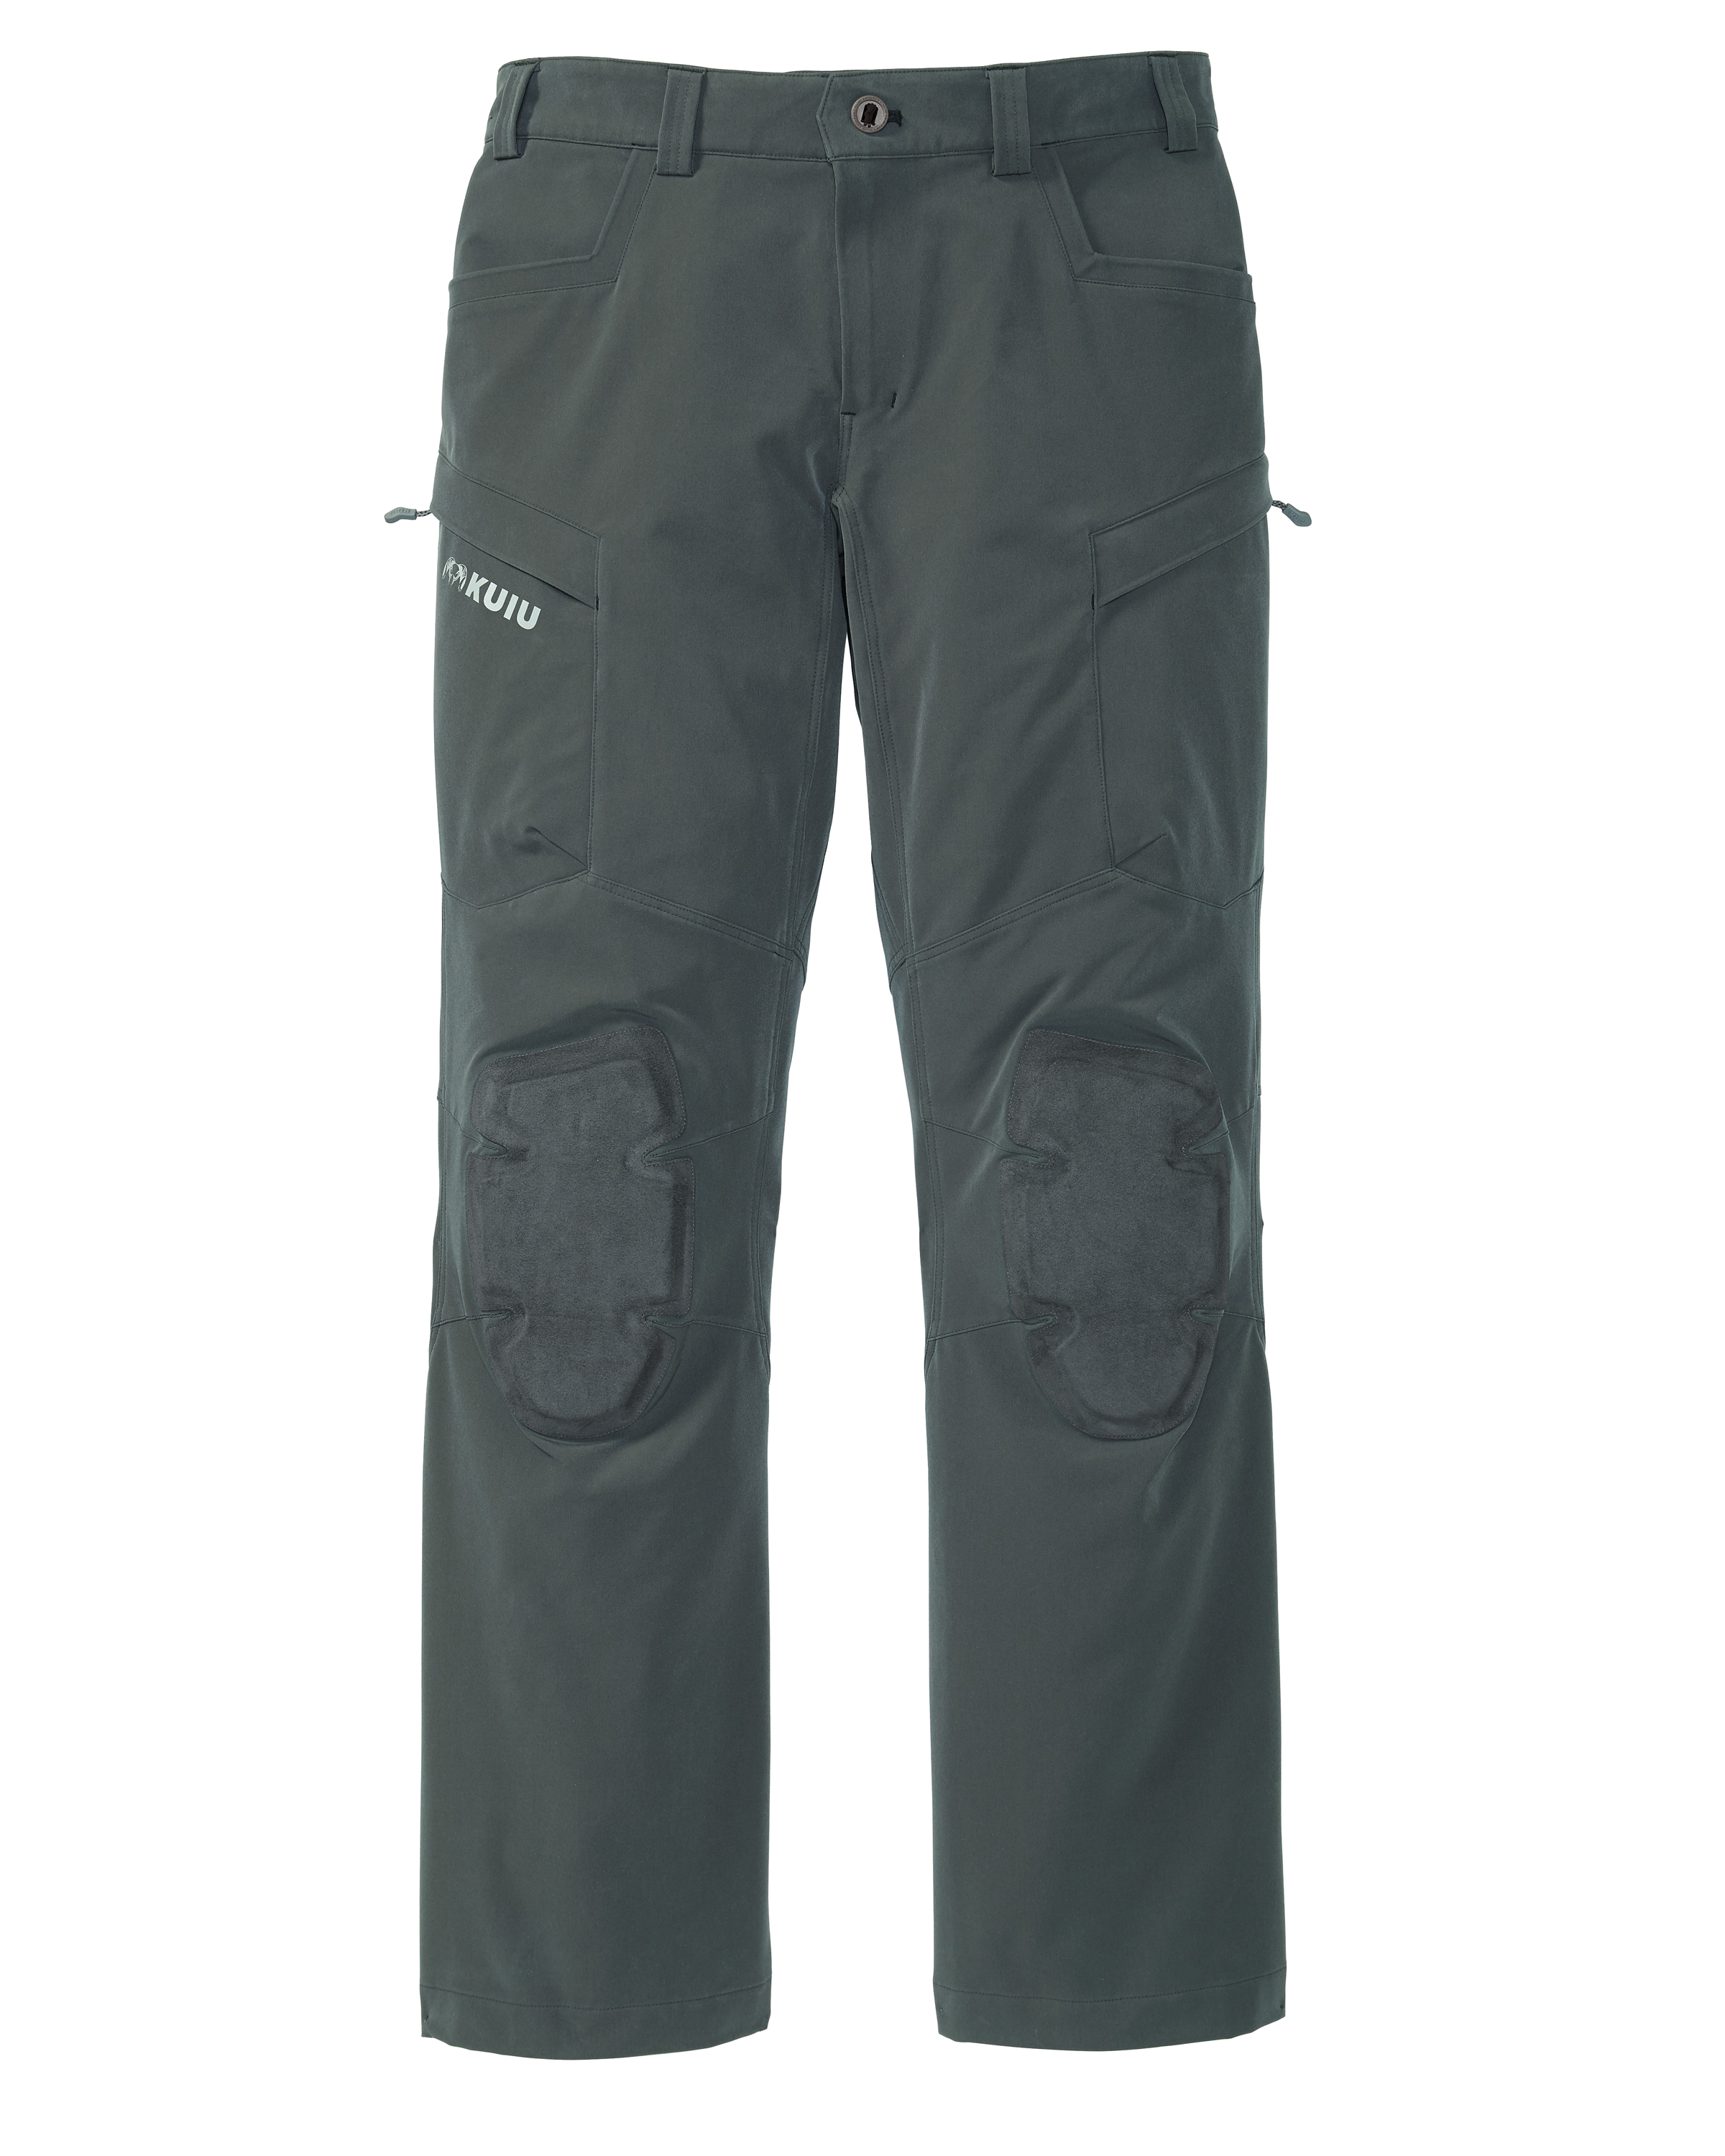 Pro Pant: Hunting Pants with Knee Pads